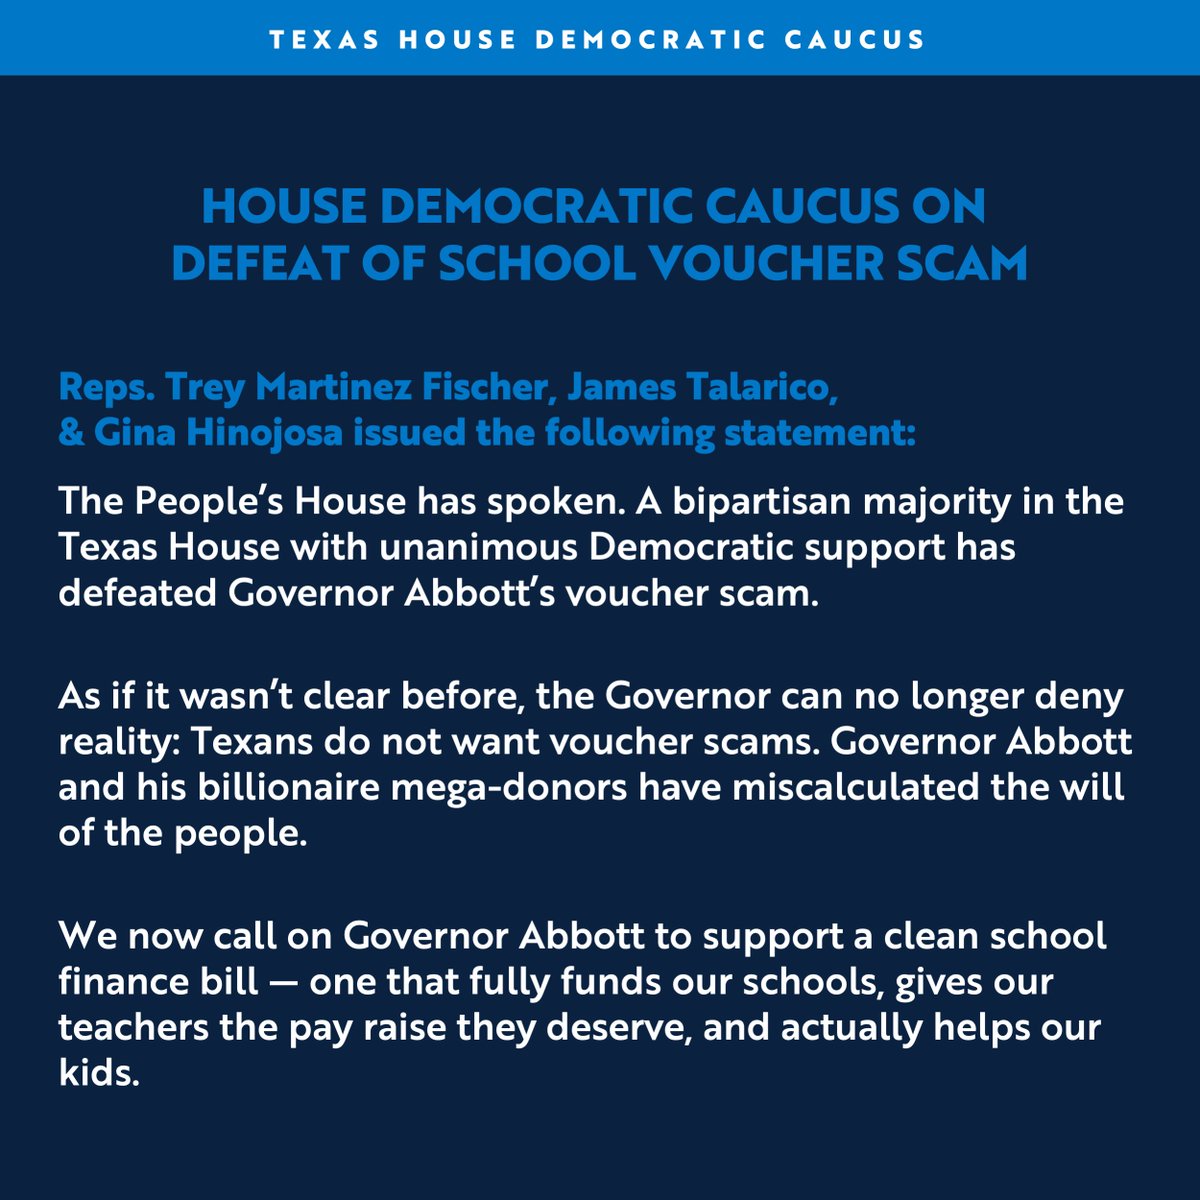 The People’s House has spoken. A bipartisan majority in the Texas House with unanimous Democratic support has defeated Governor Abbott’s voucher scam. #txlege